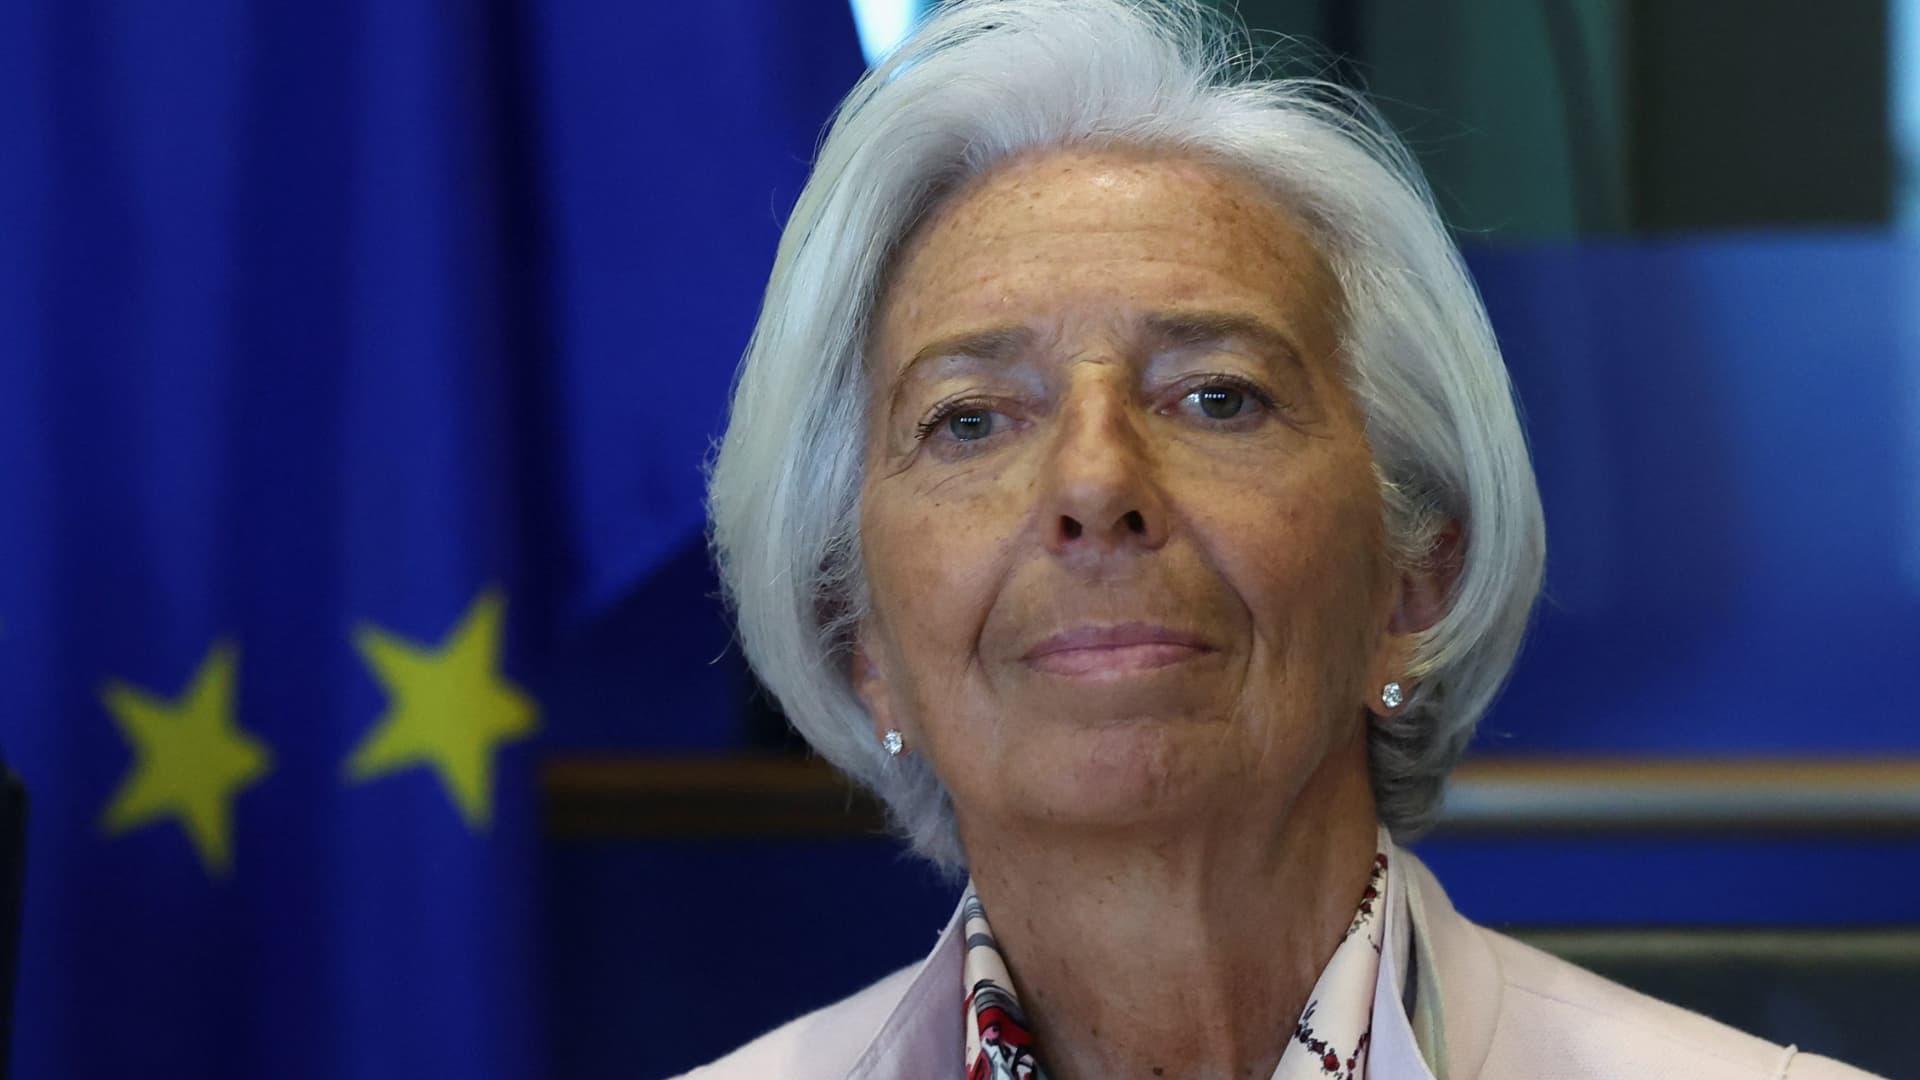 ECB's Lagarde responds to scathing staff survey: 'I'm very proud and honored to lead the institution'